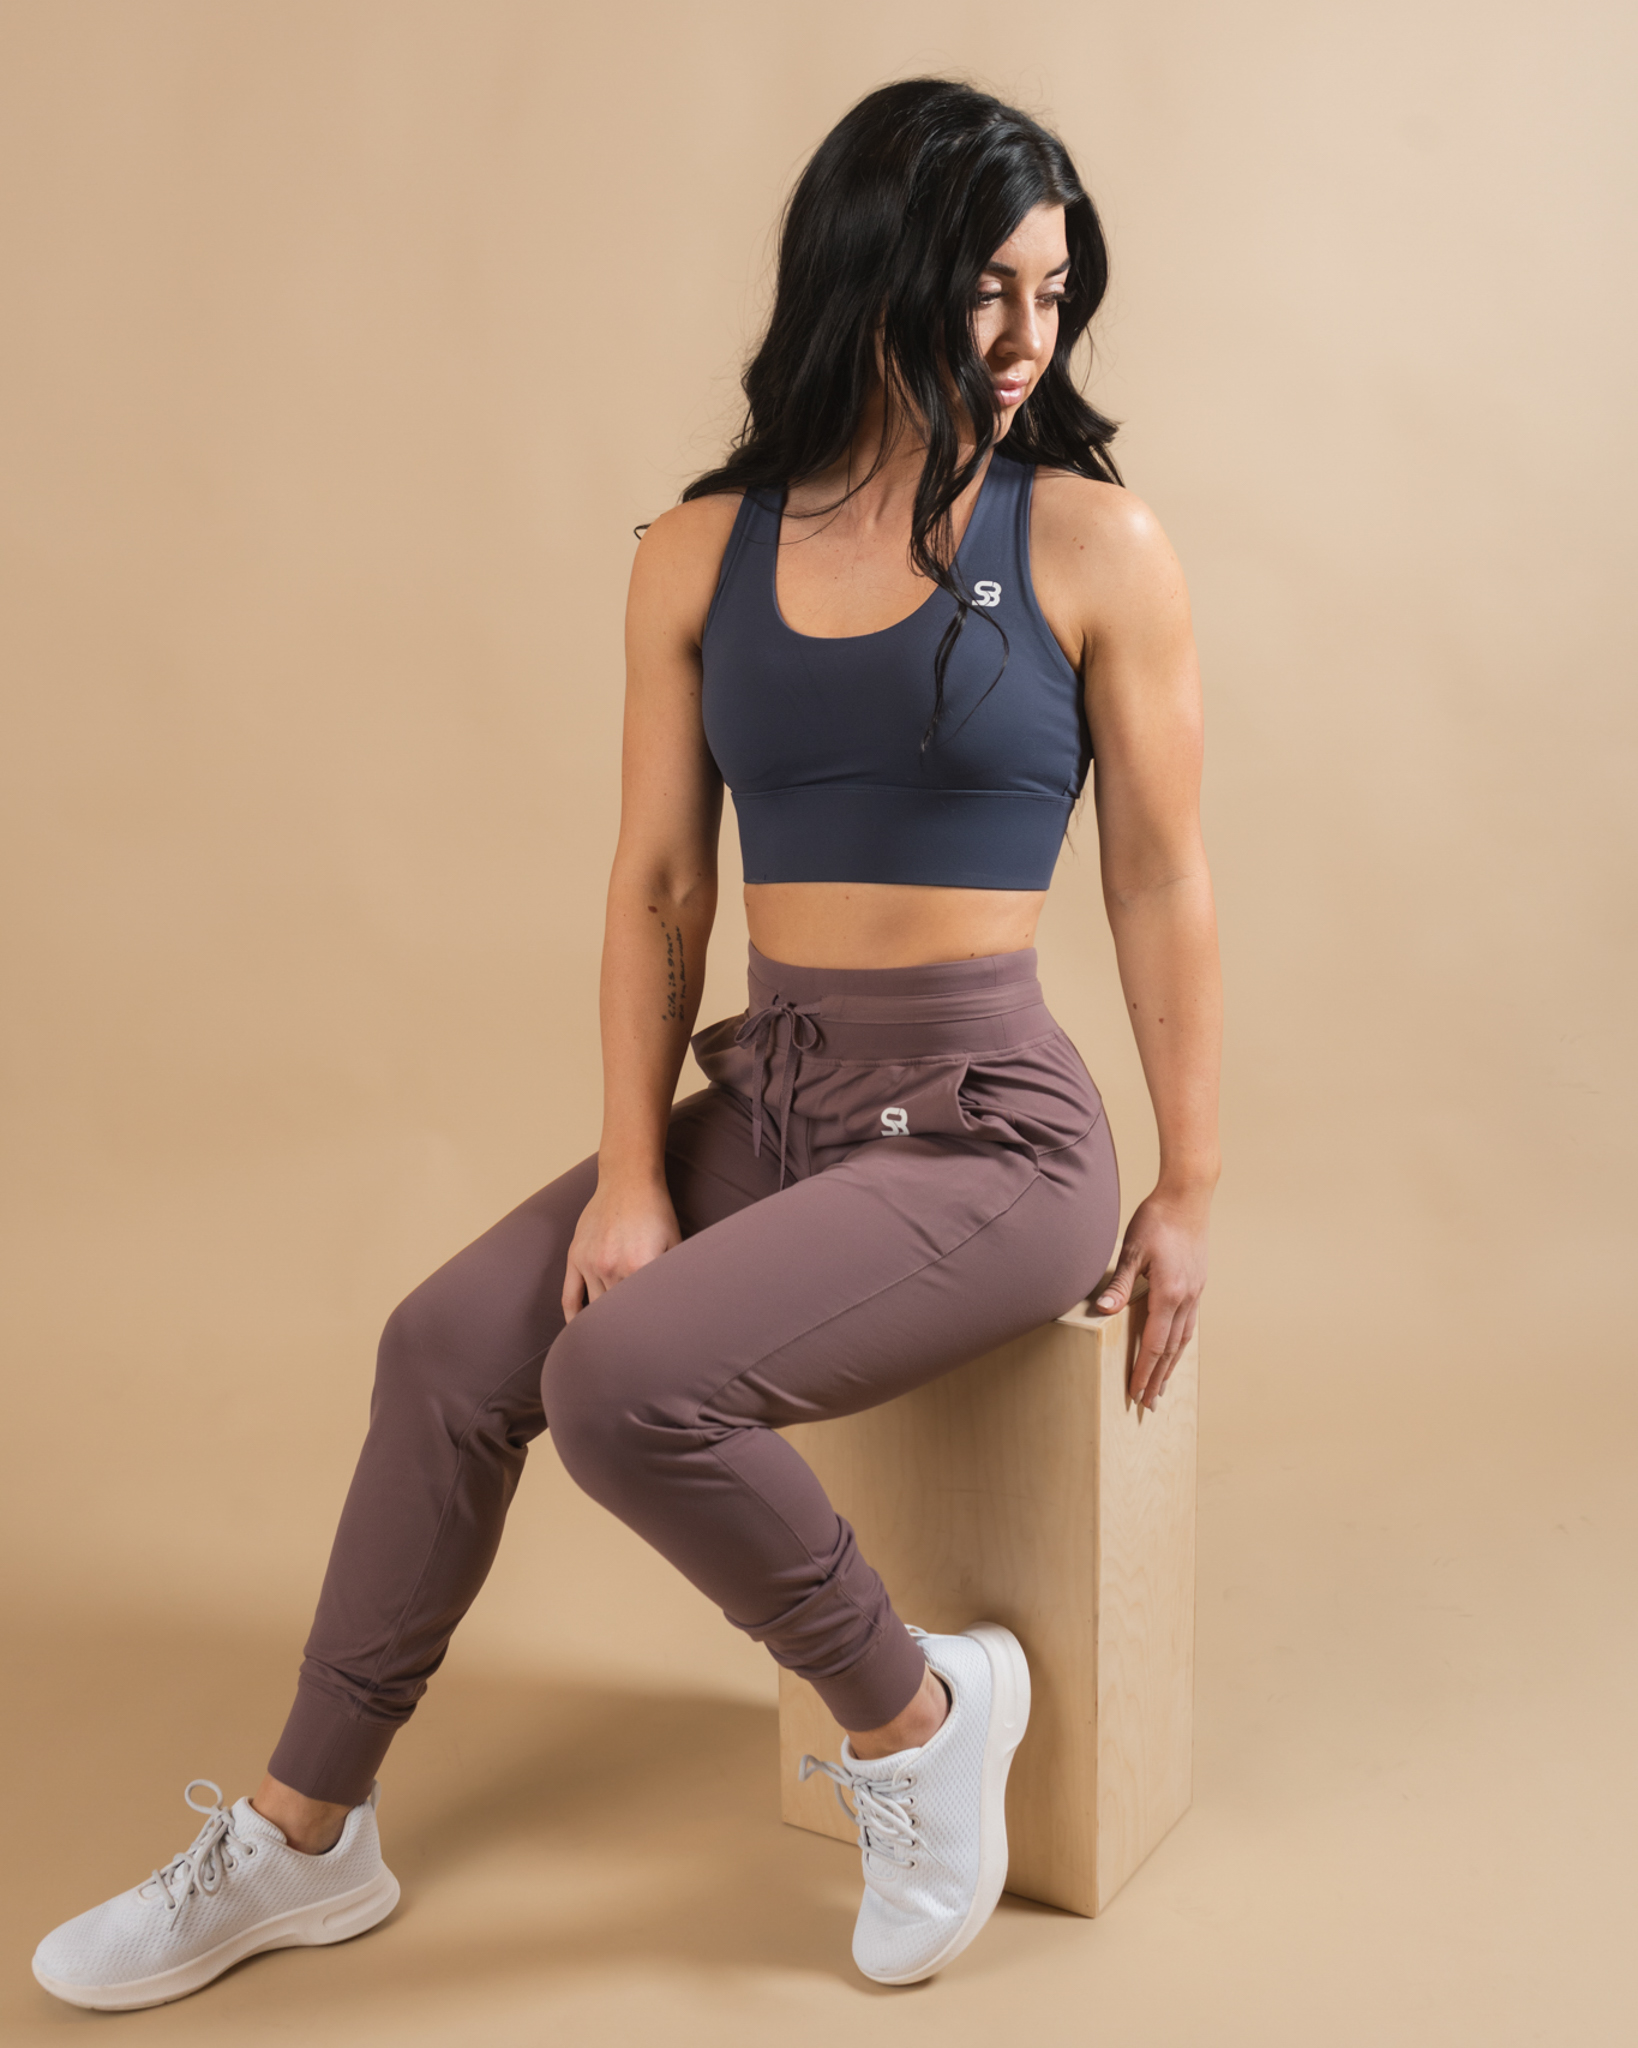 Fitness apparel marketing and content creation.